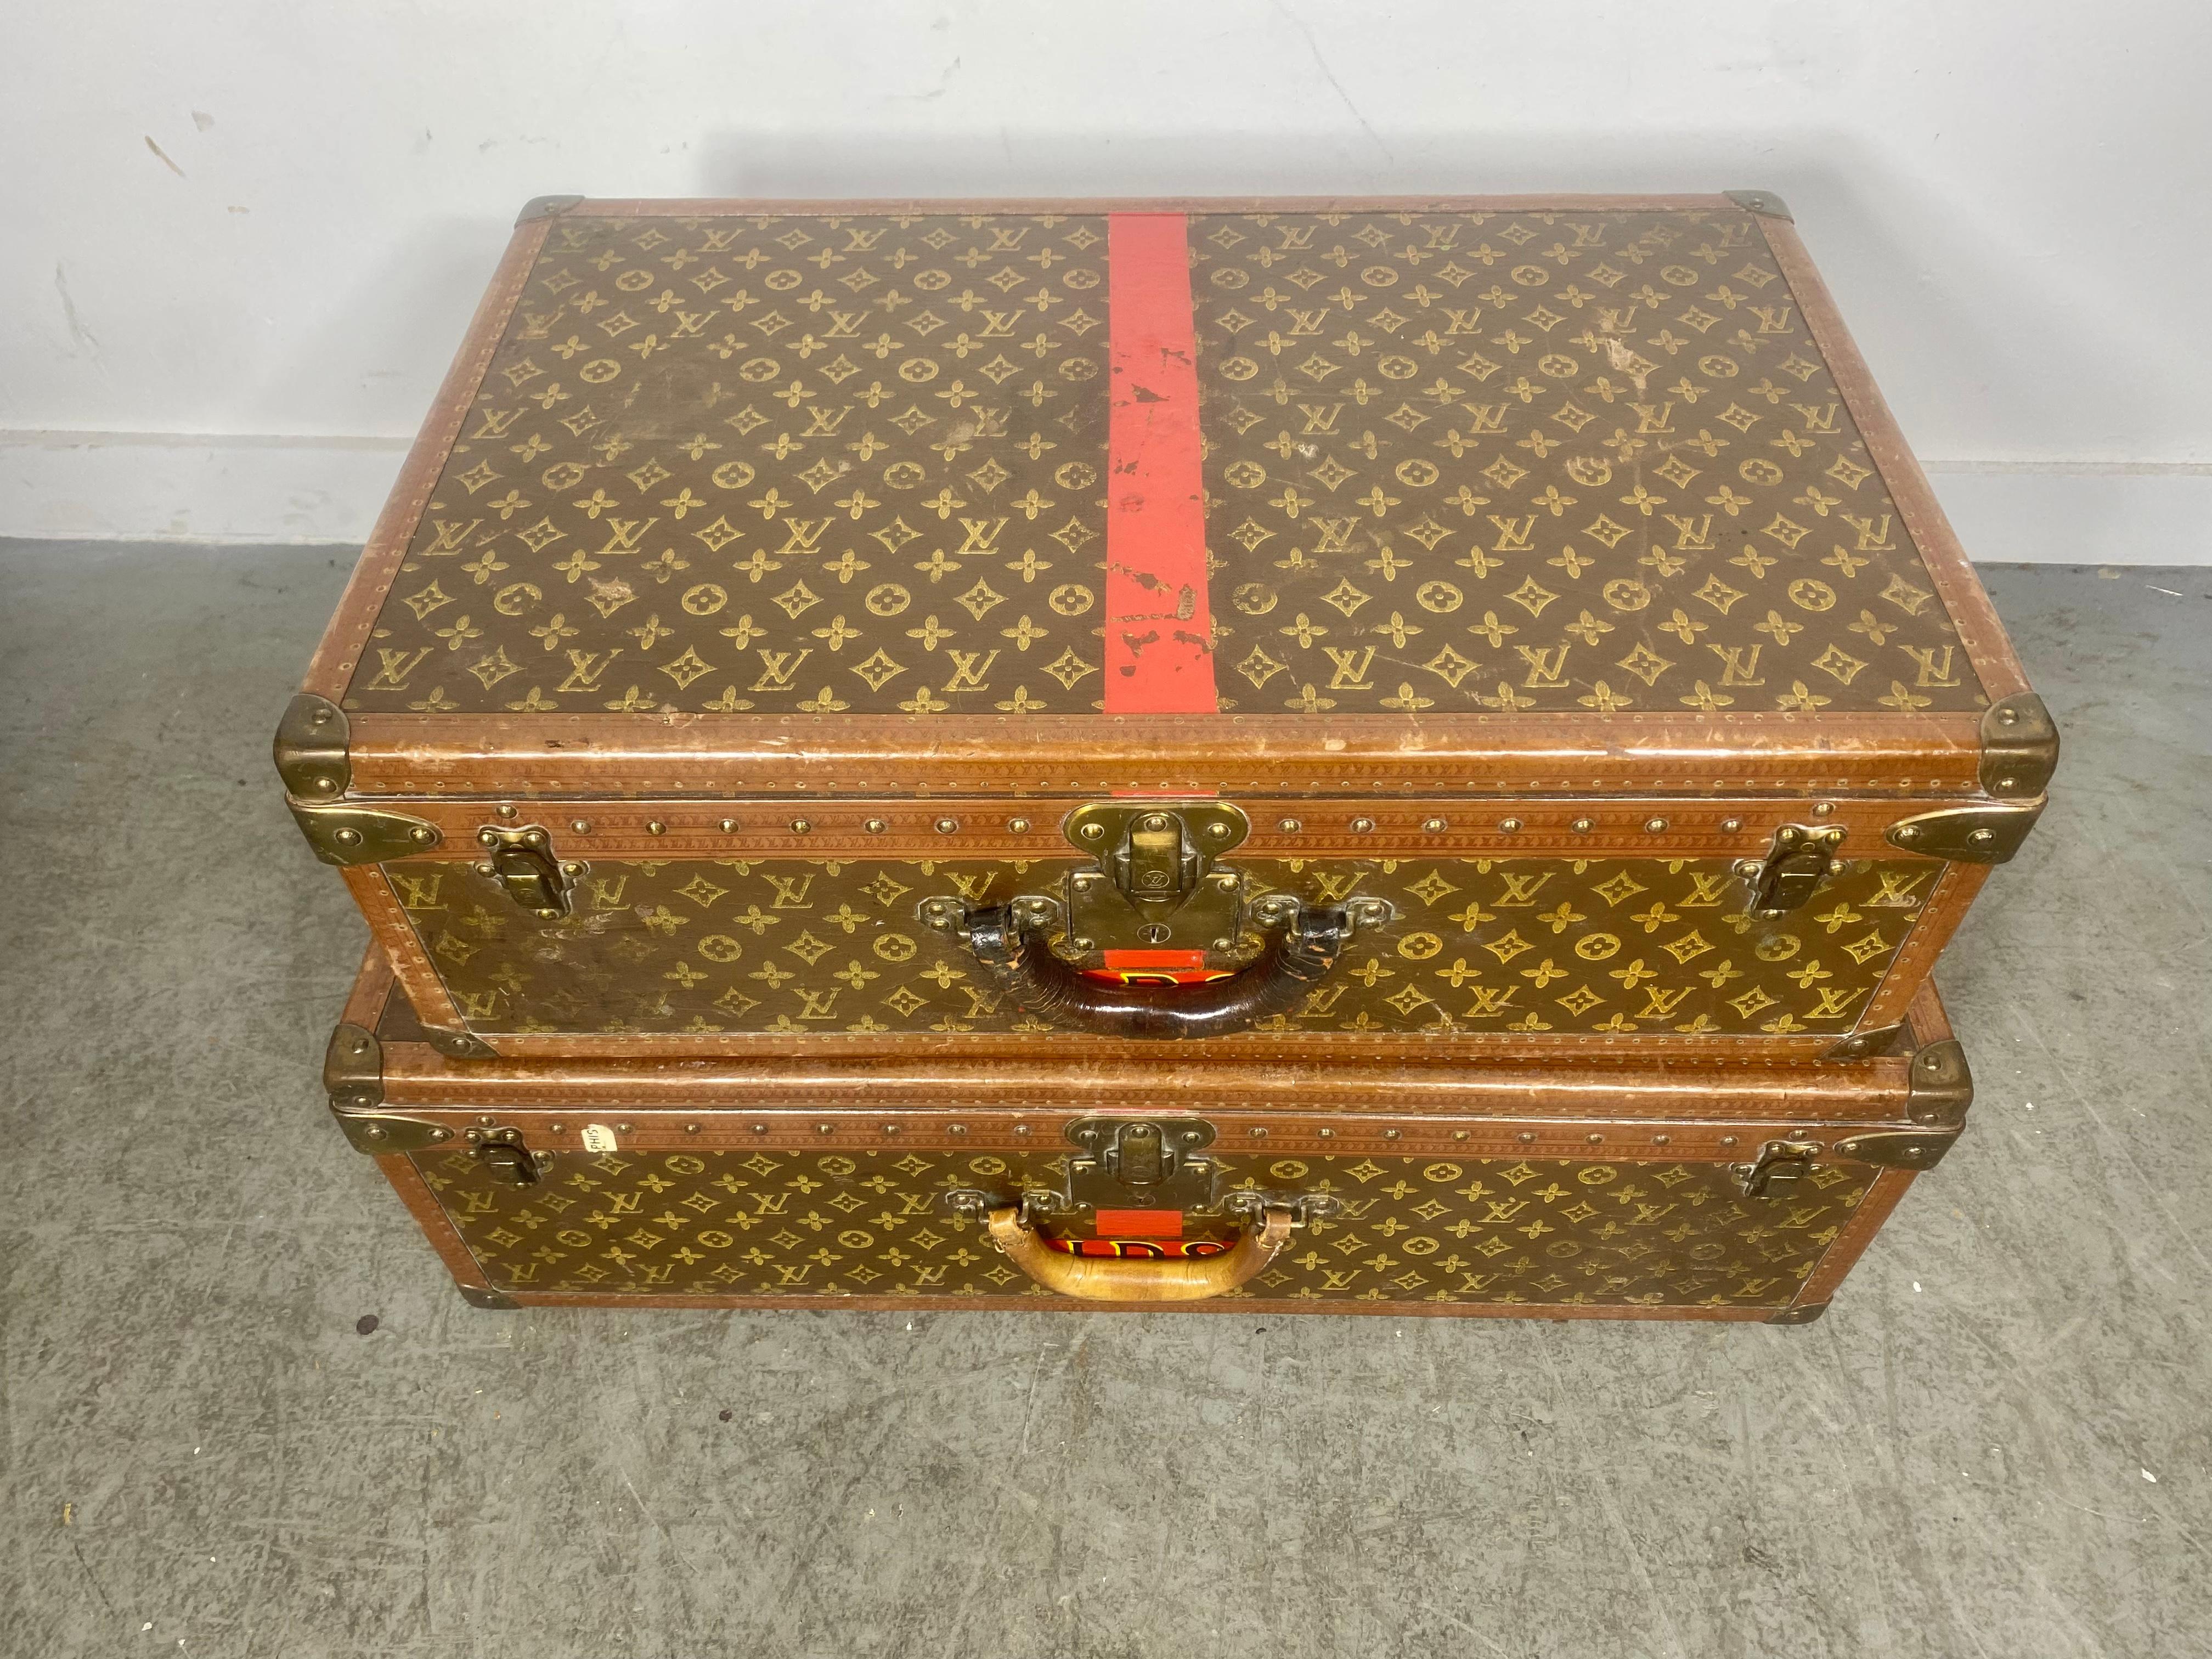 Pair Vintage 1920's, 30's Louis Vuitton Alzer 80 and 70 monogram luggage .Original hardware/detailing with leather handles. Personalized hand painted red stripes with initials IDS.. Amazing original condition,, Age appropriate wear.